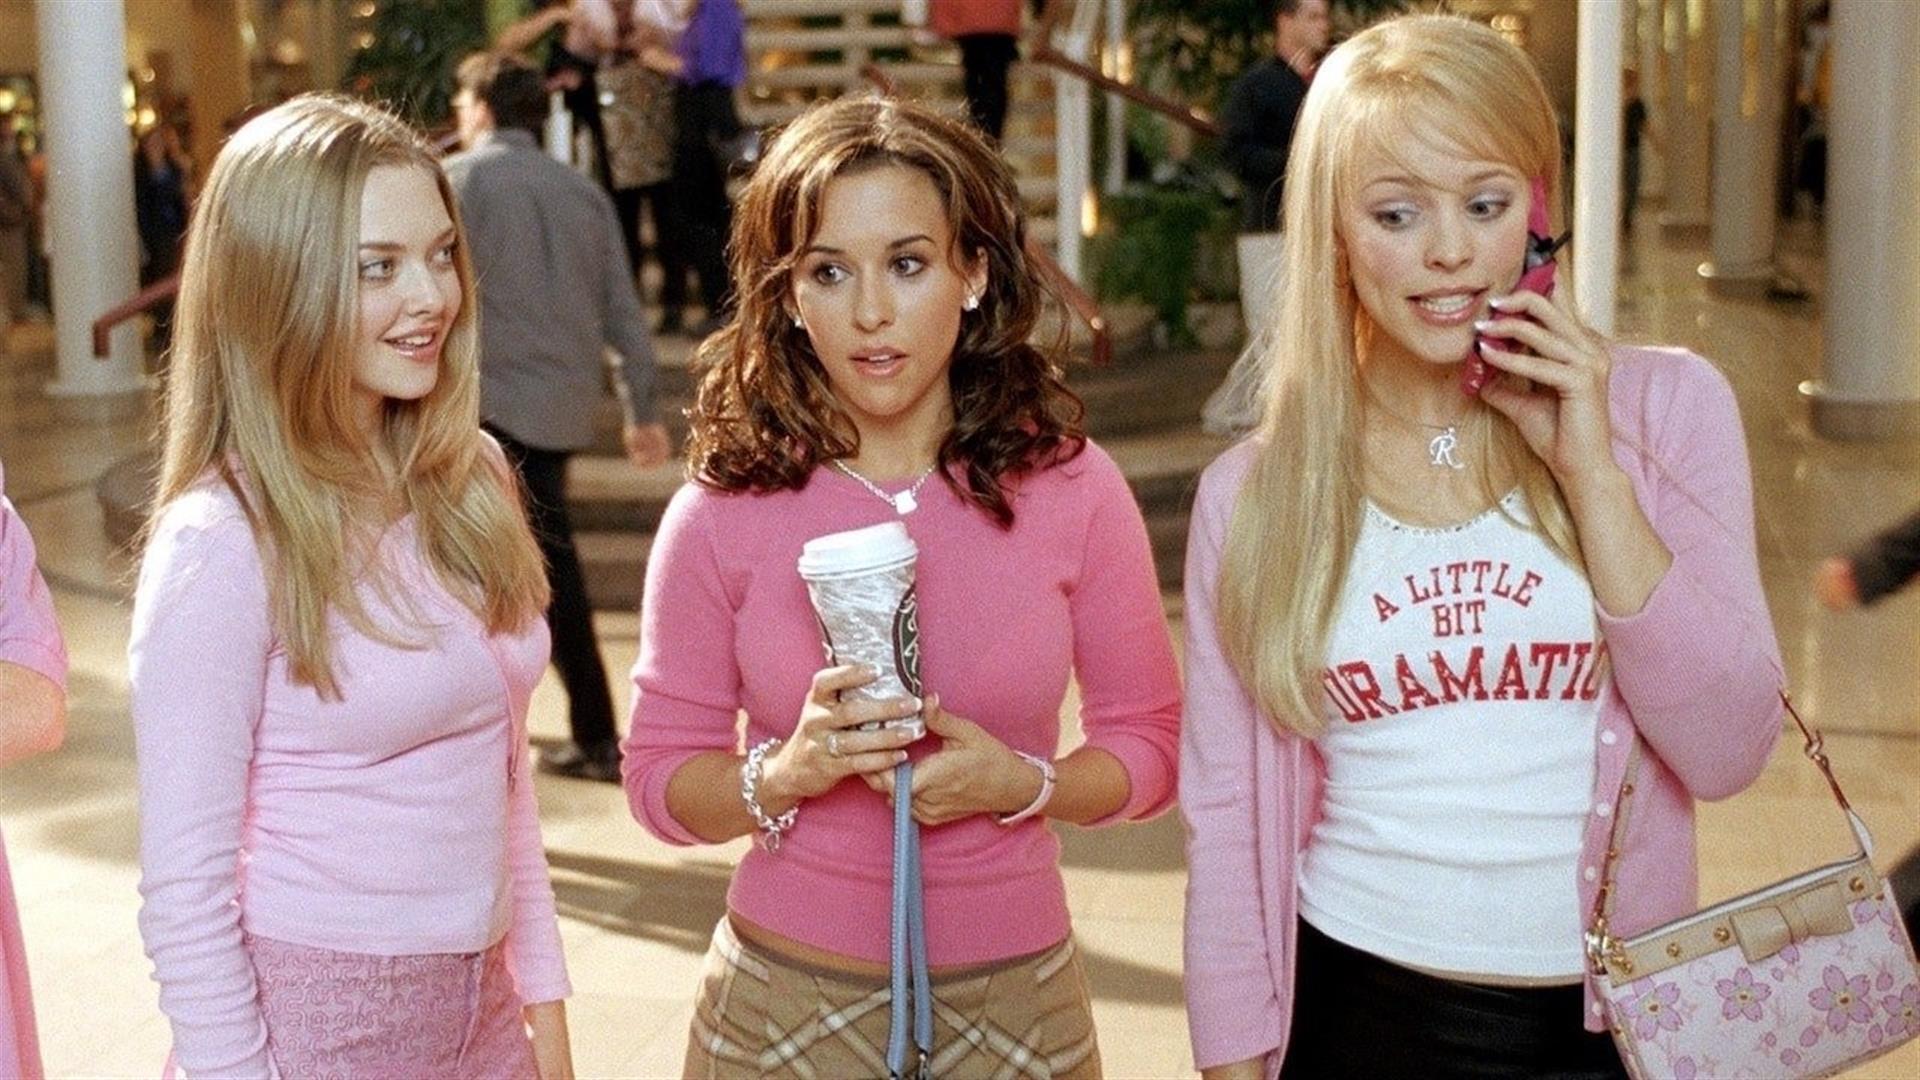 Mean Girls (12A) – Lowther Drive In Cinema - Lowther Pavilion